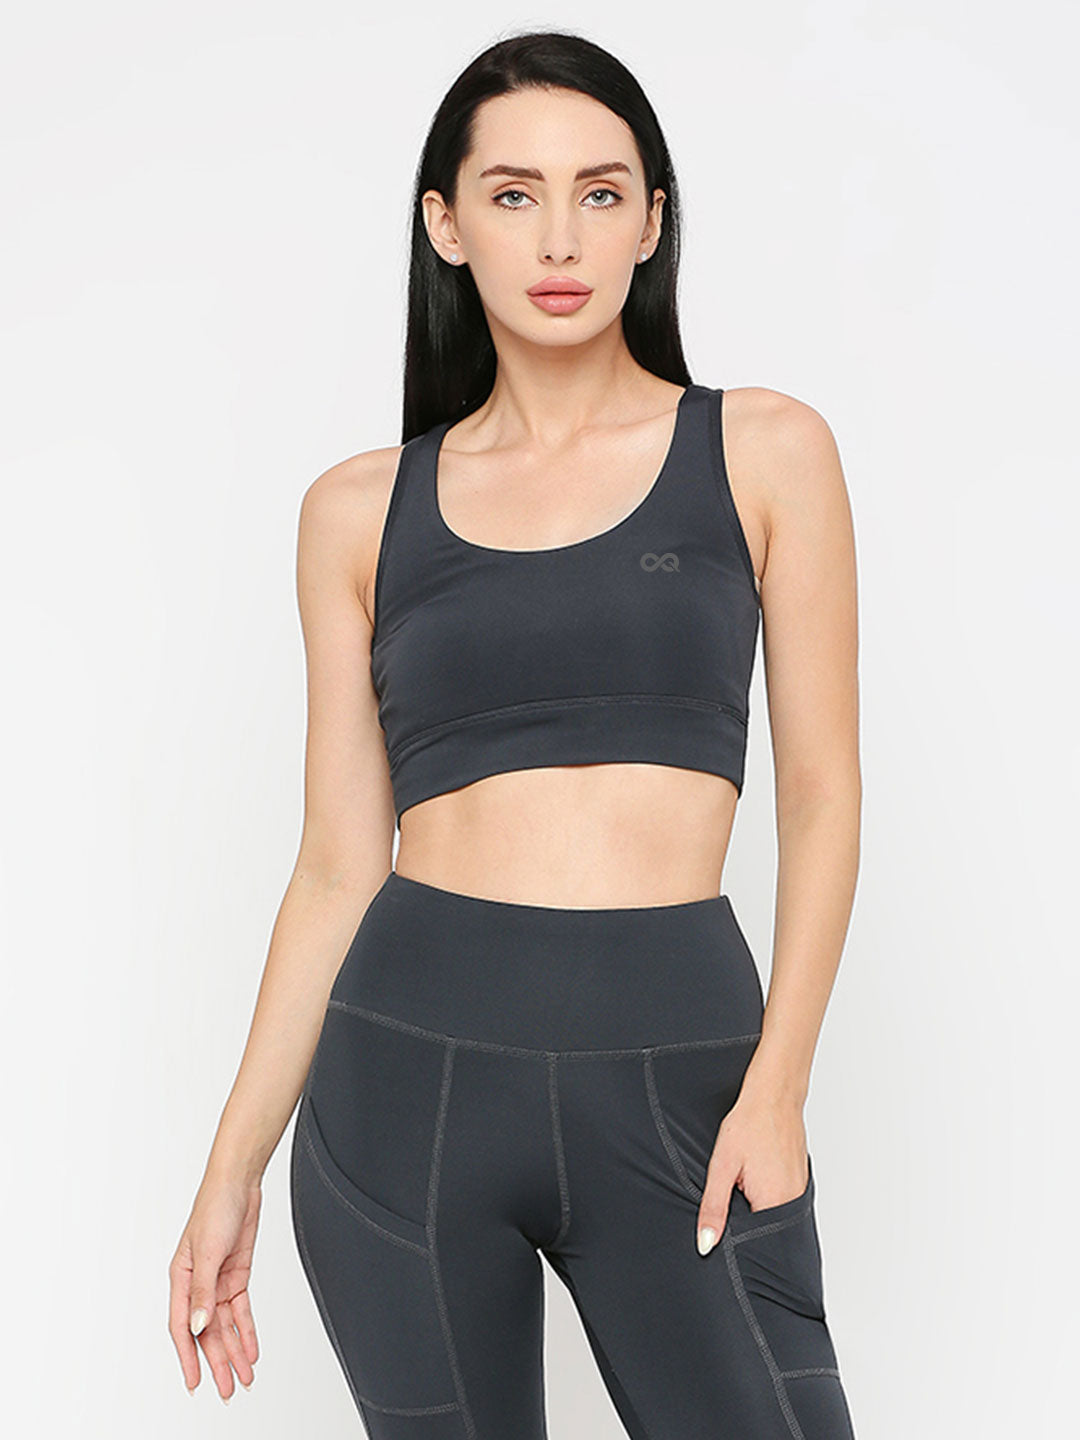 Women's Charcoal Racerback Sports Bra - Stay Supported and Stylish